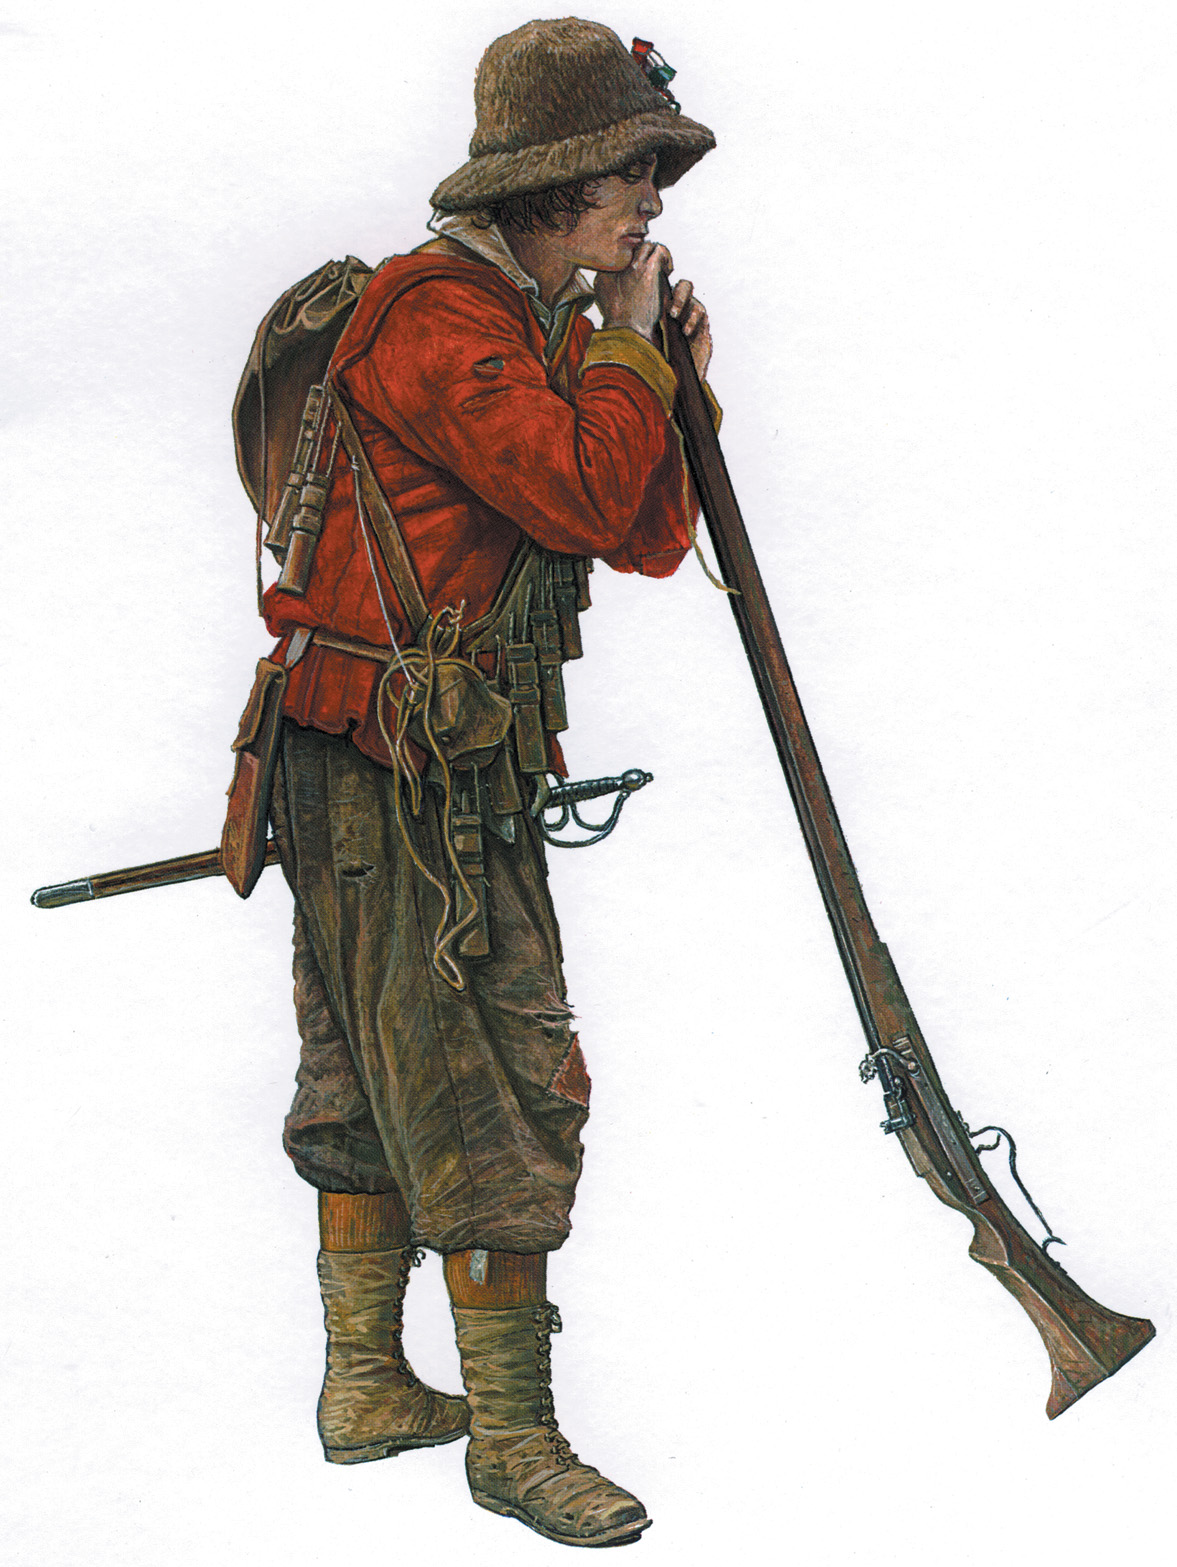 A British musketeer, uniformed for the first time in the now famous red coat, and armed with a matchlock musket and sword.